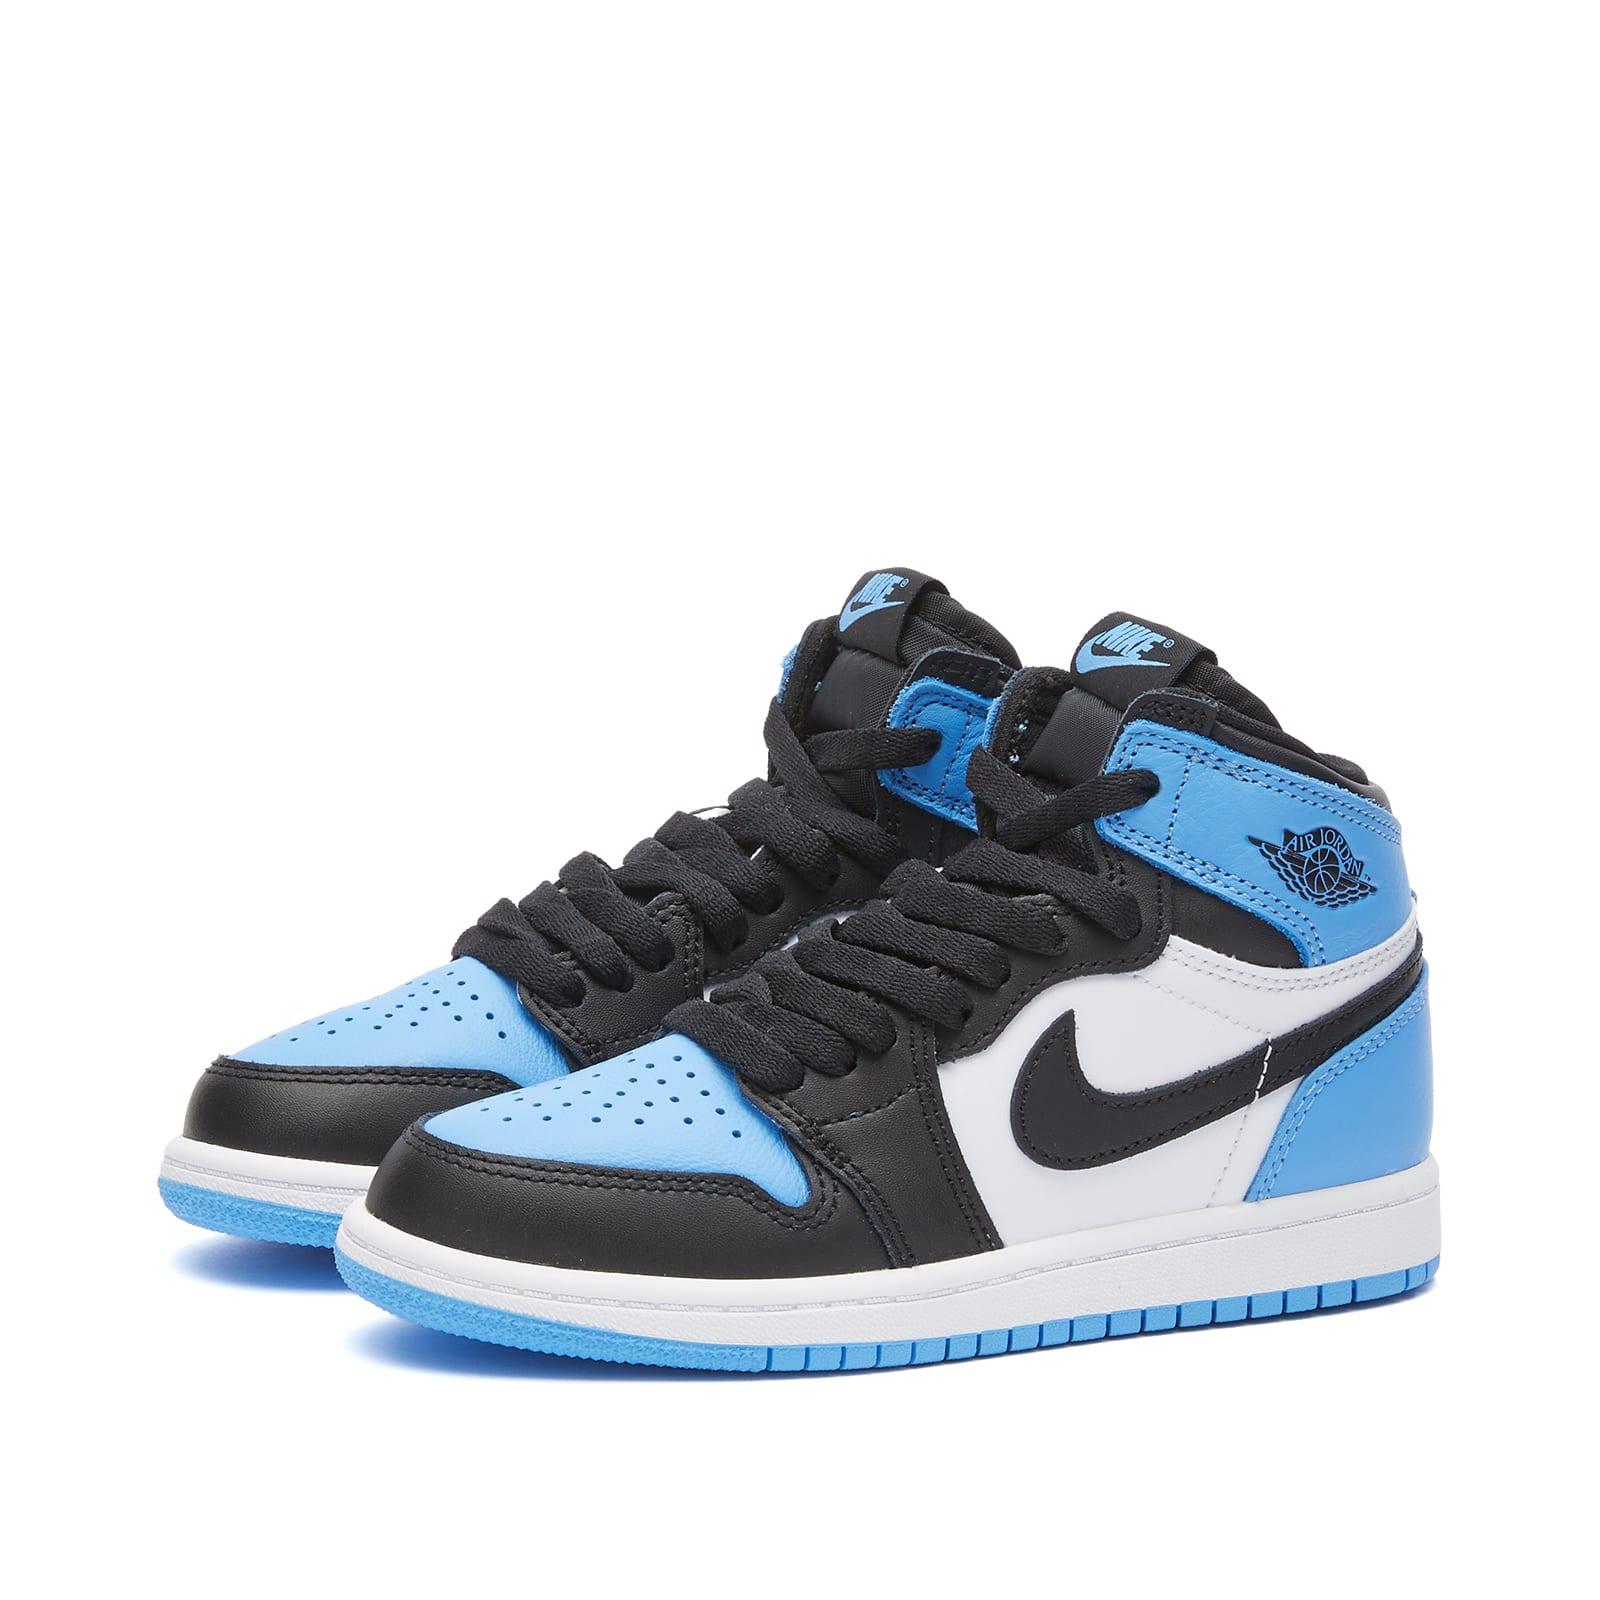 Nike 1 Retro High Og Ps Sneakers in Blue | Lyst Canada